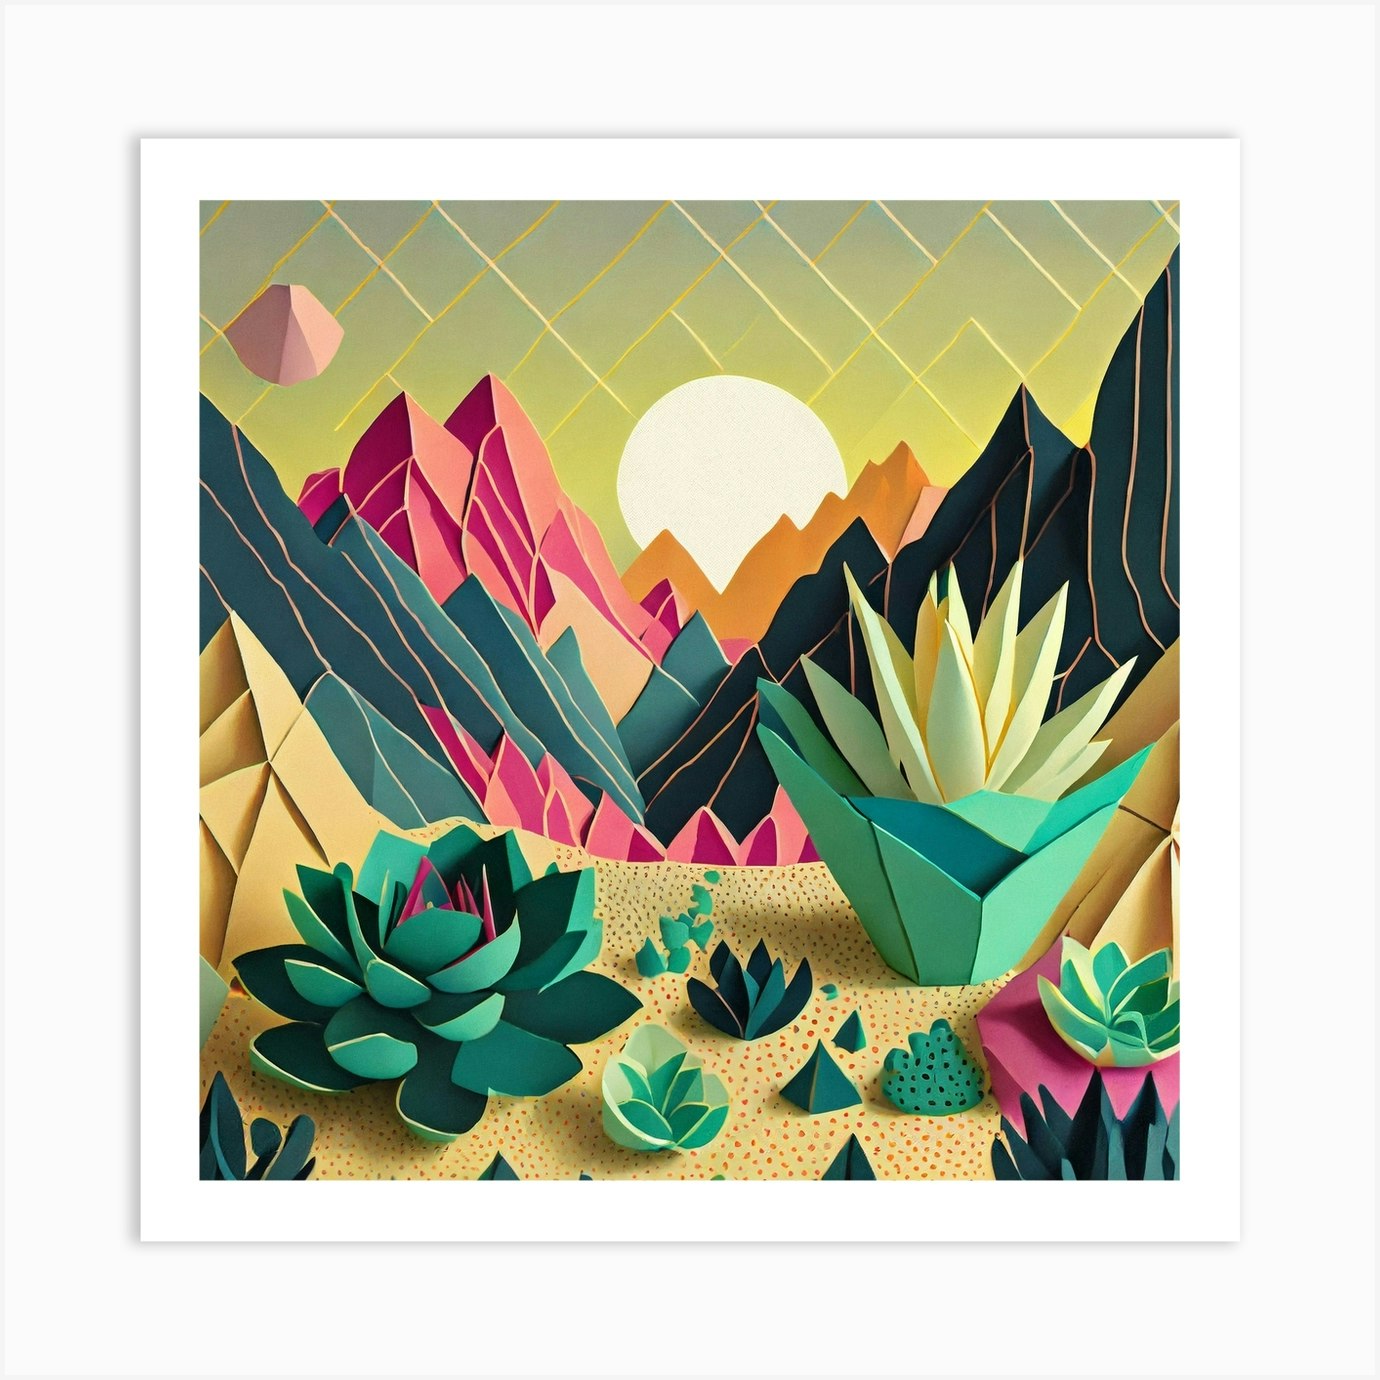 Firefly Beautiful Modern Abstract Succulent Landscape And Desert Flowers  With A Cinematic Mountain V (9) Art Print by Moriah Dawn Designs - Fy